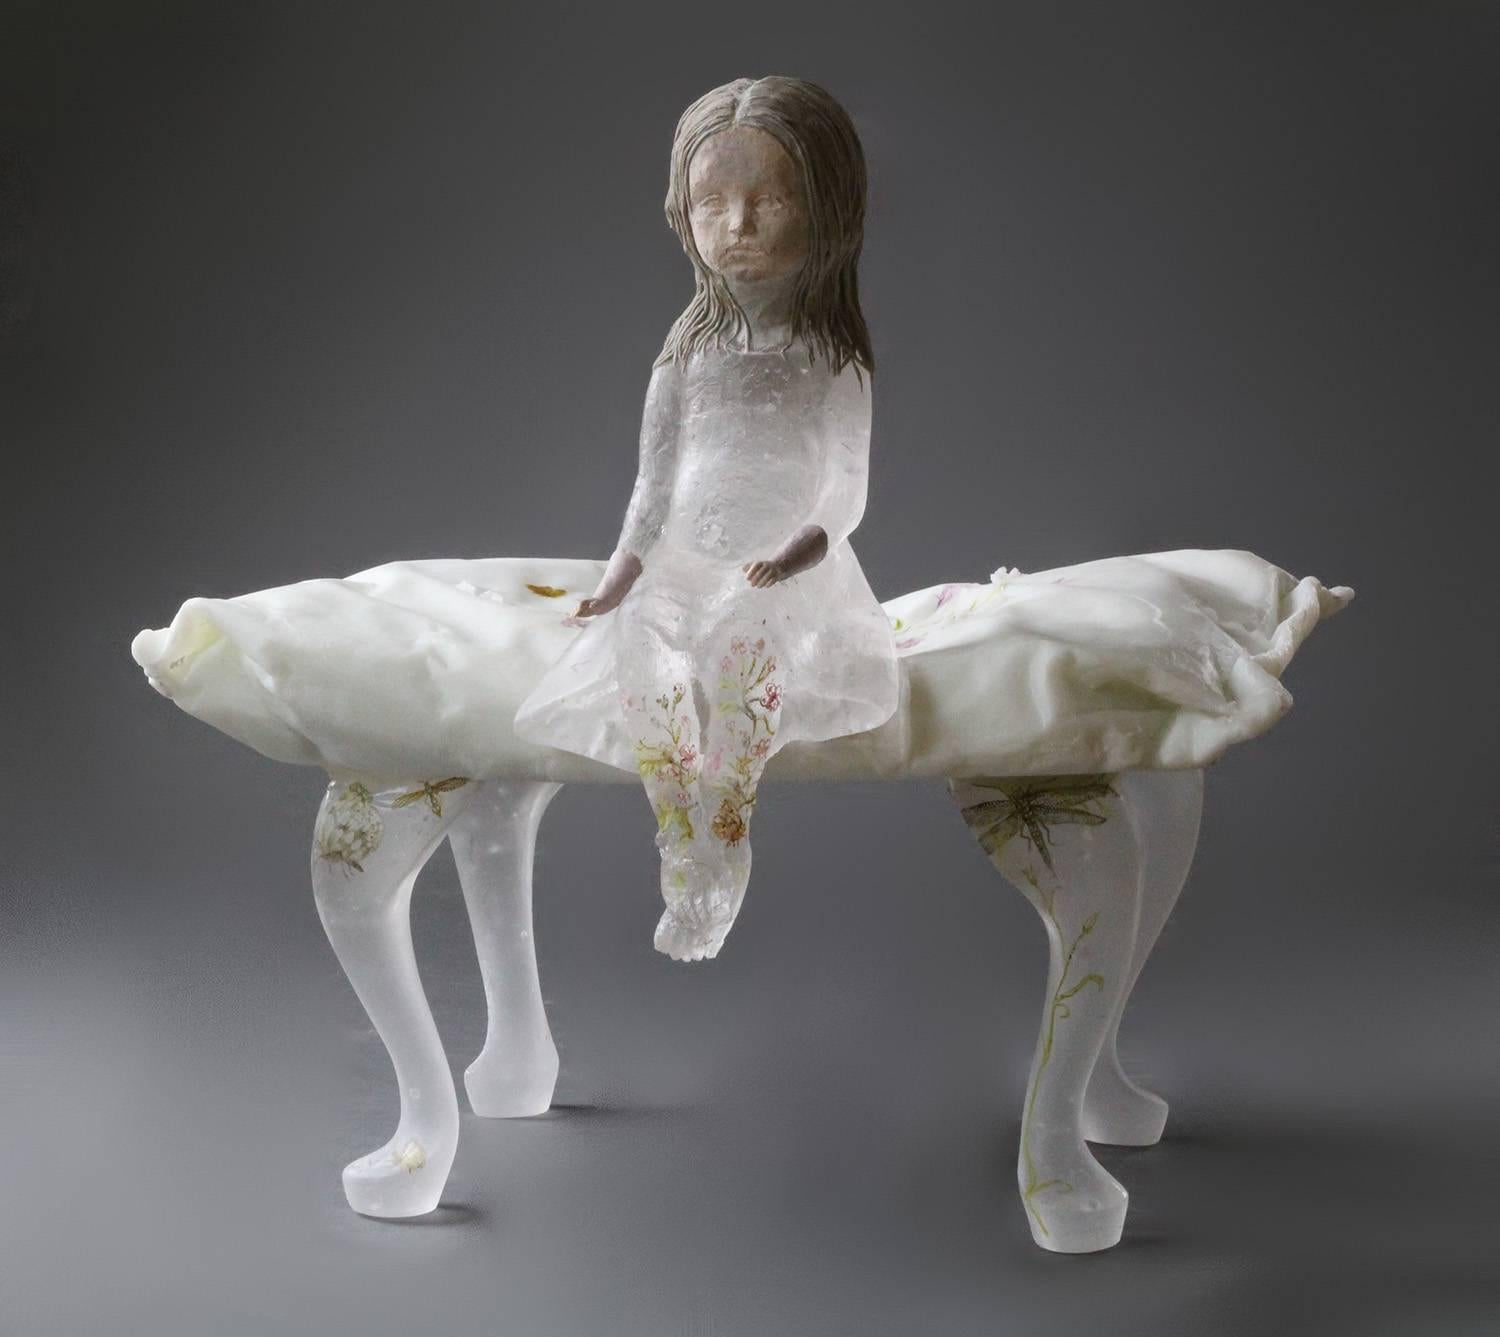 Cloud Pillow - Contemporary Sculpture by Christina Bothwell